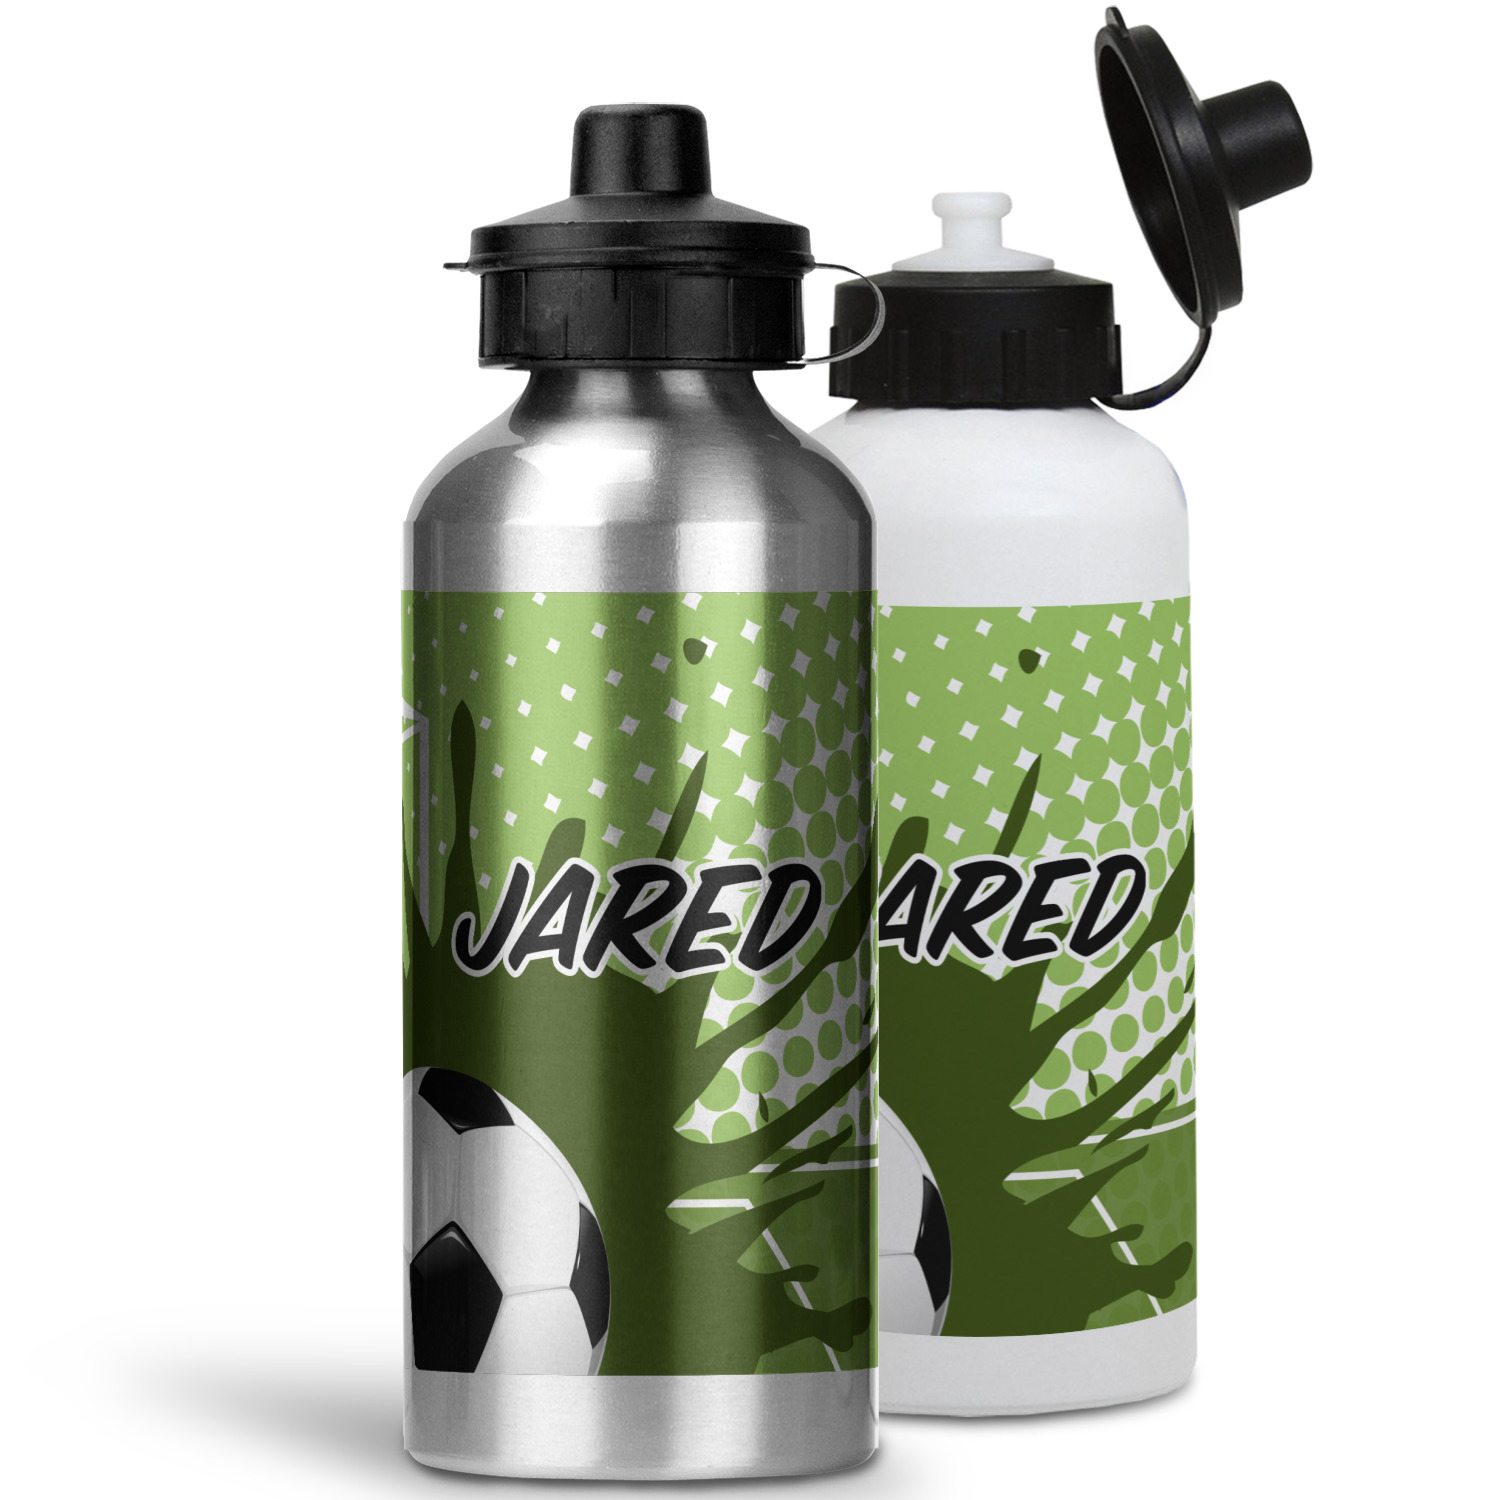 Personalized Soccer Ball Water Bottle